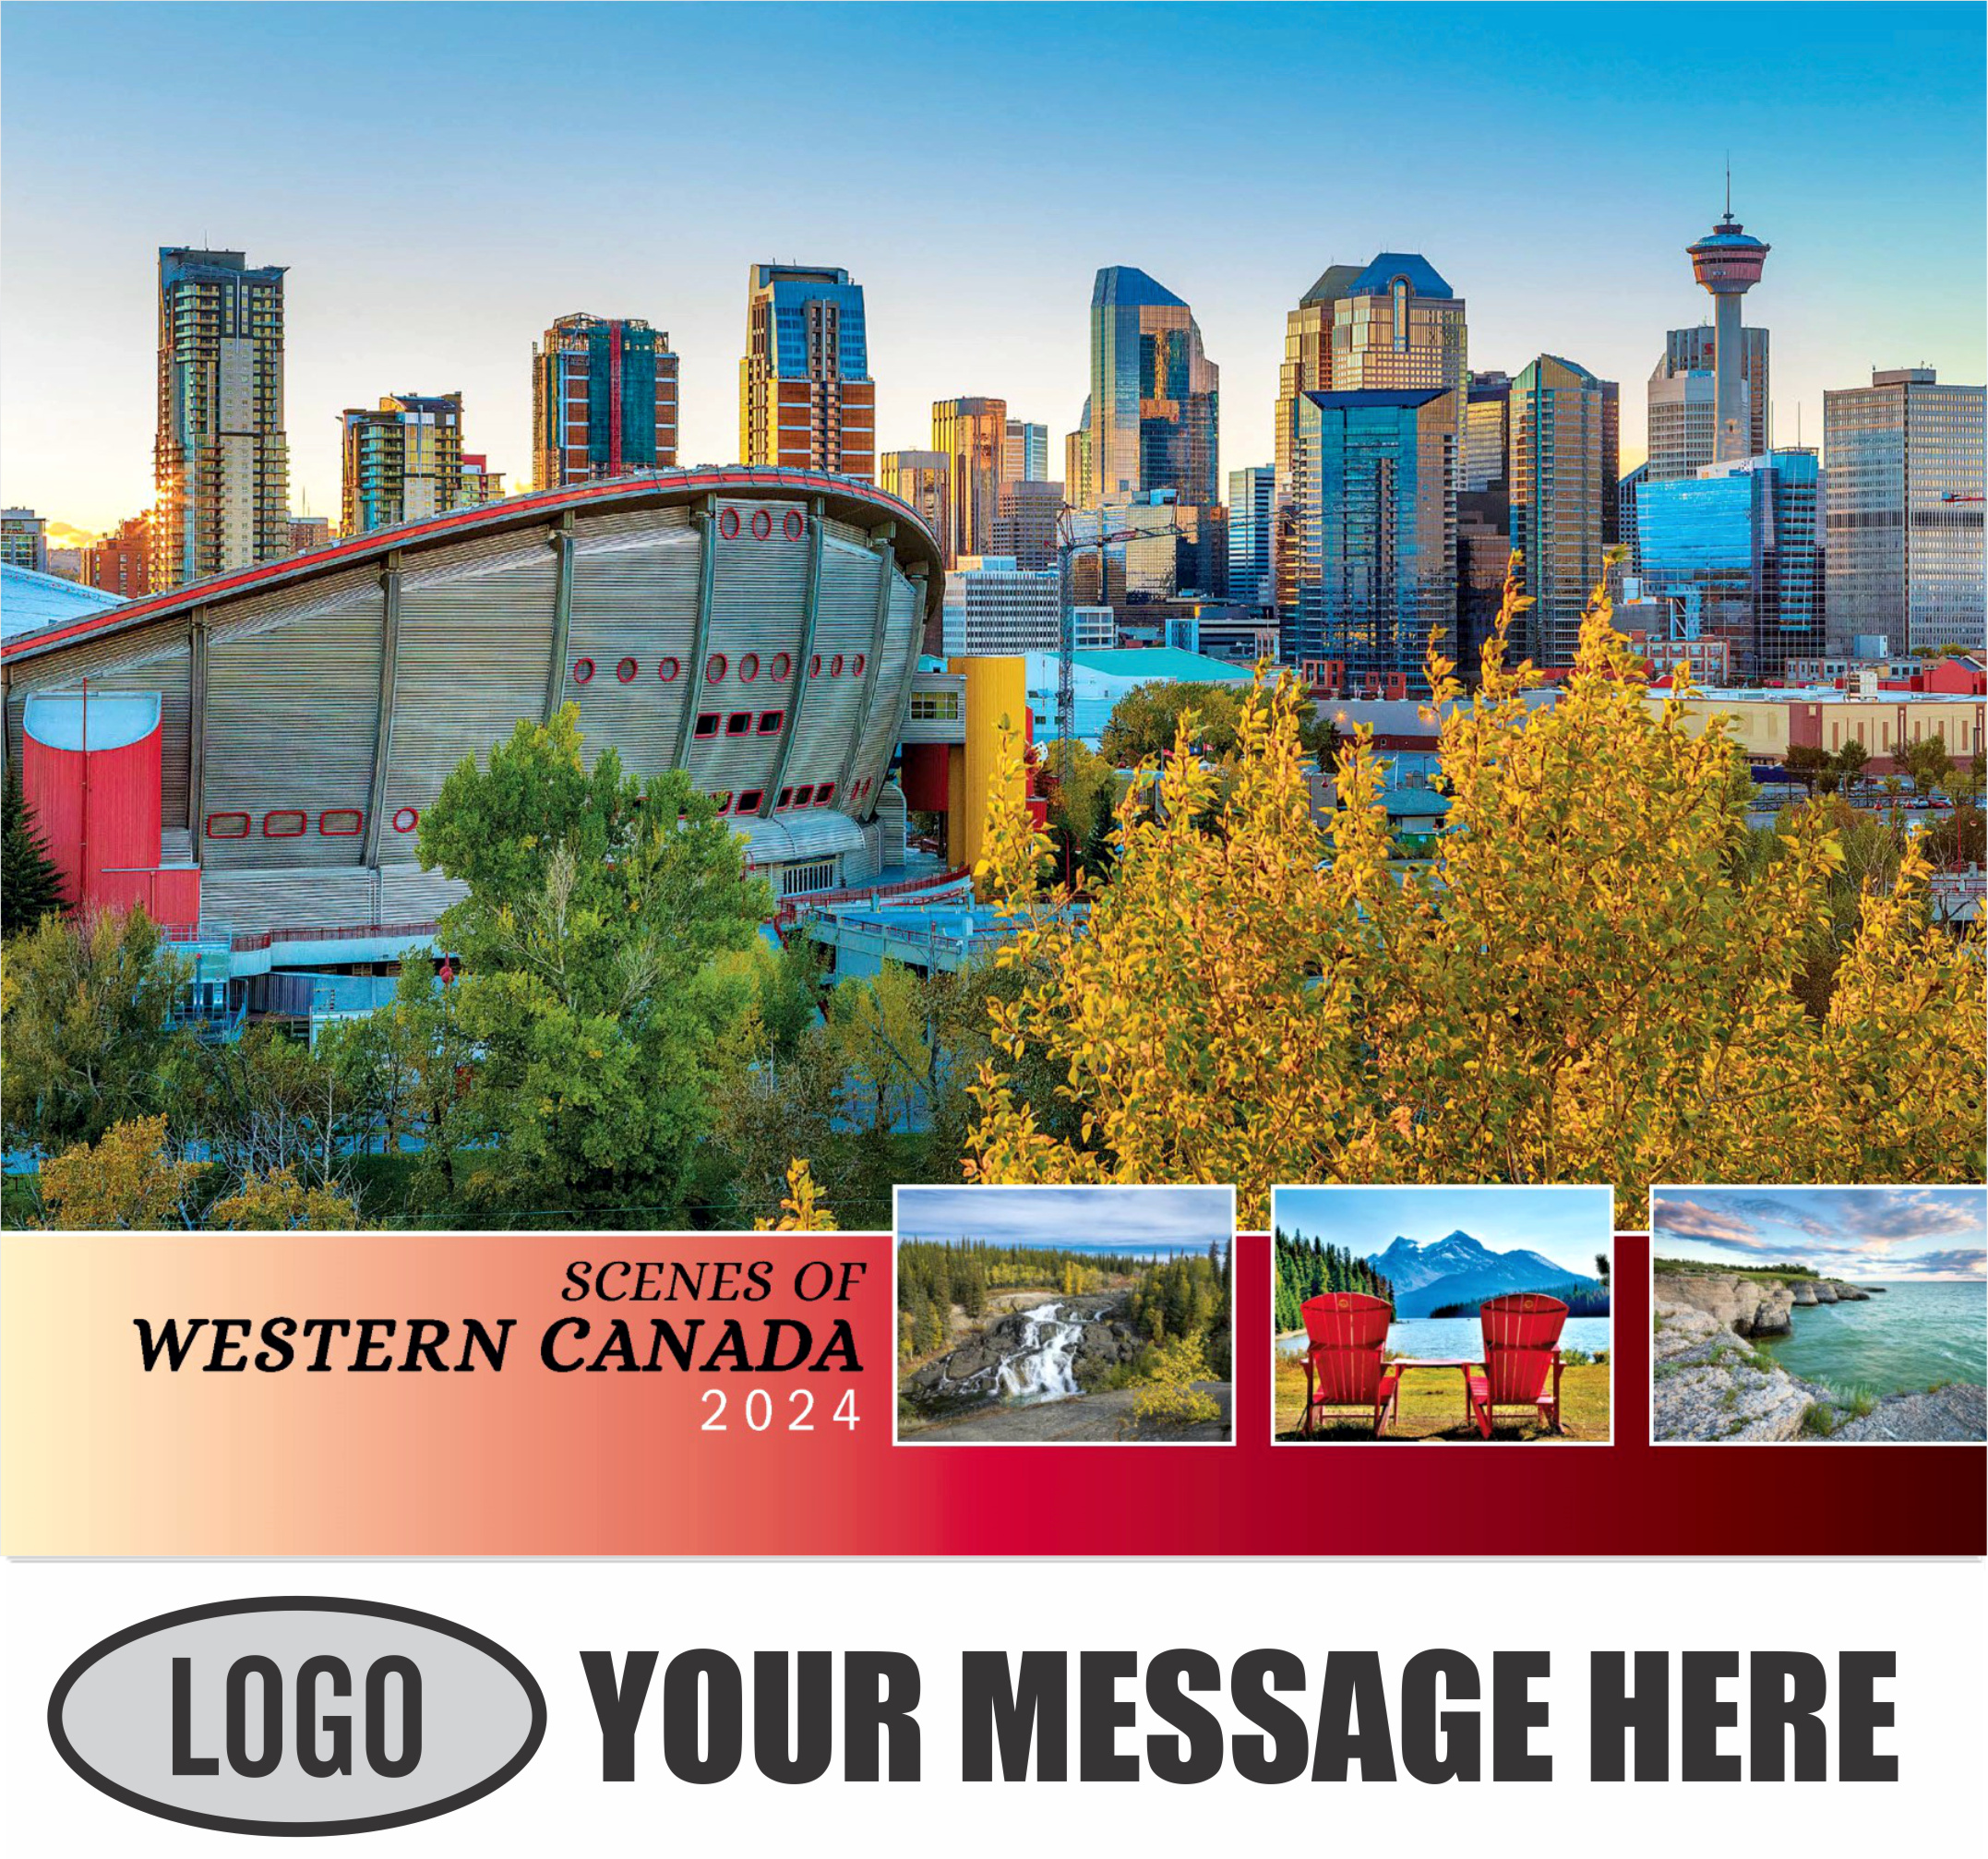 Scenes of Western Canada 2024 Business Promotional Wall Calendar - cover